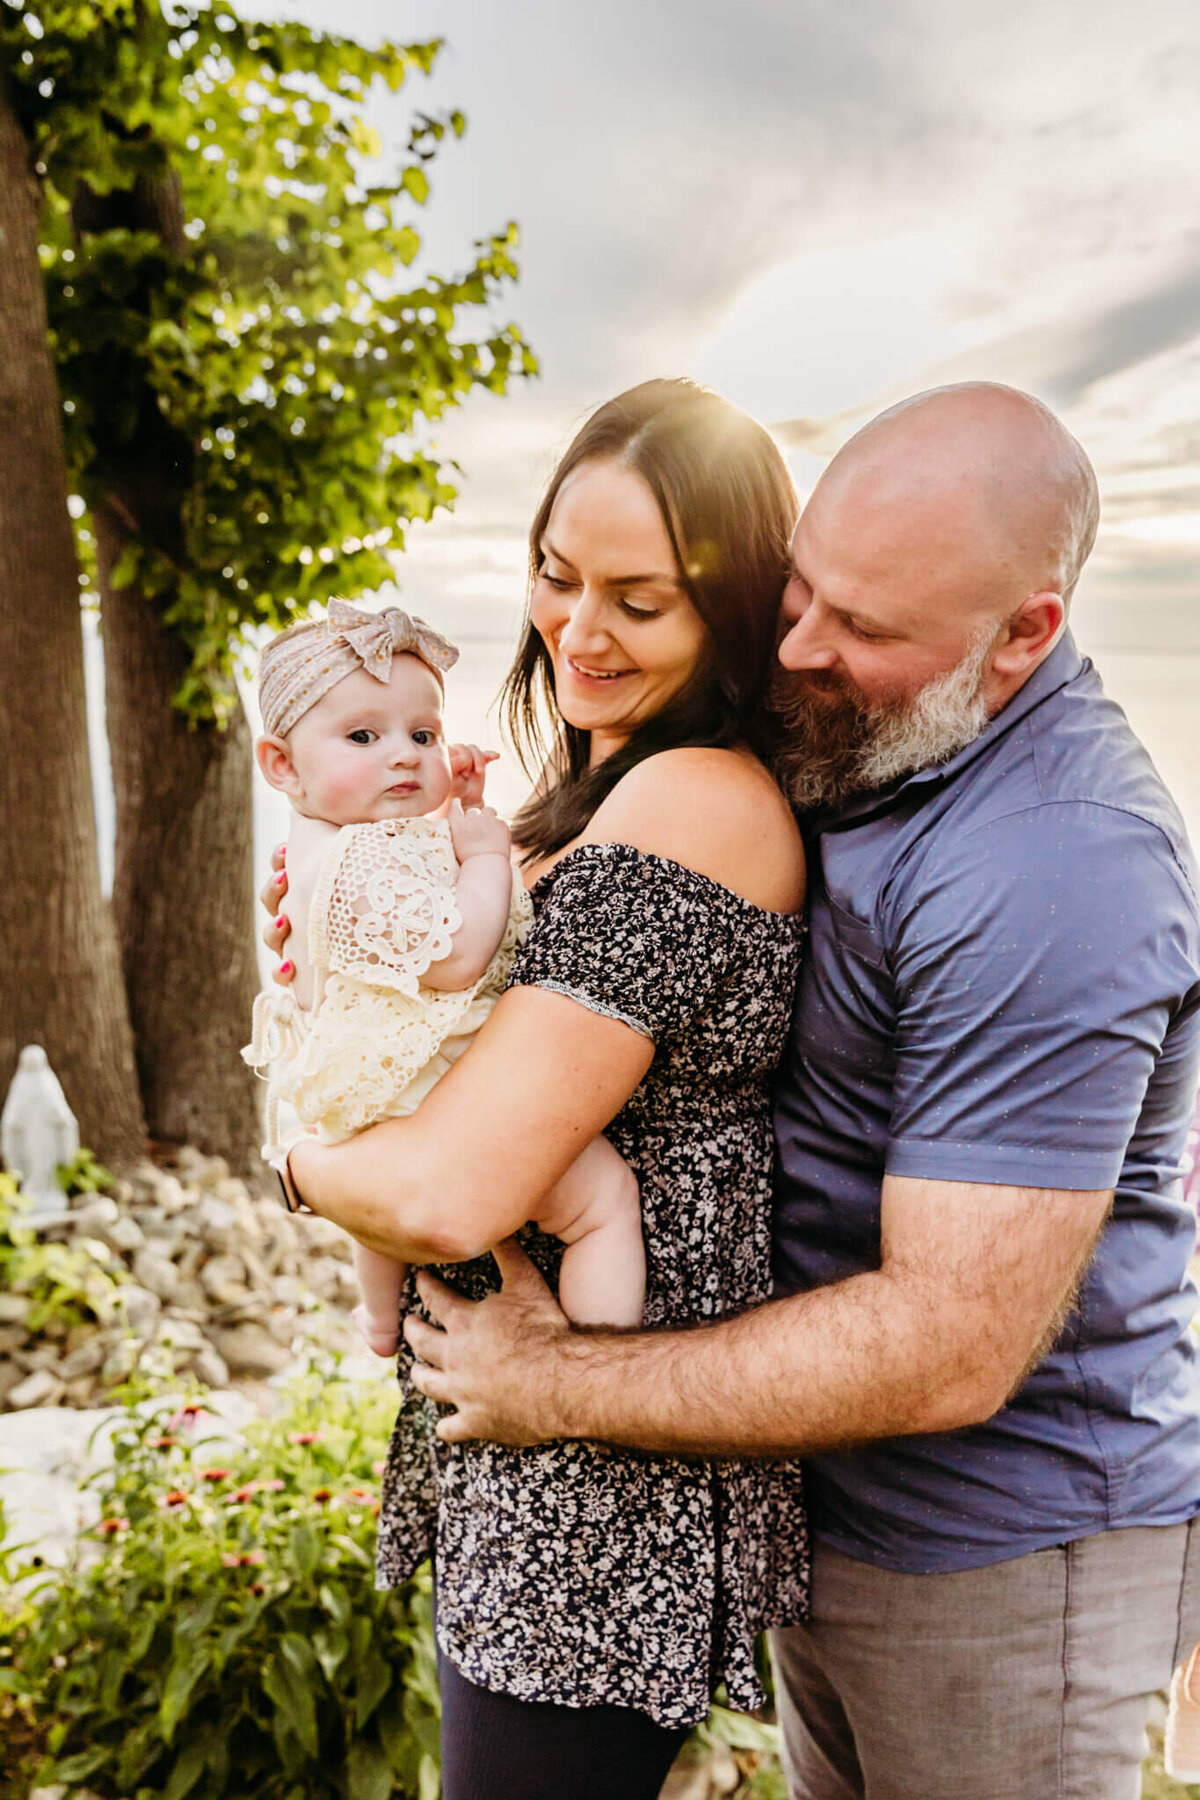 new parents admiring baby girl during family photo session